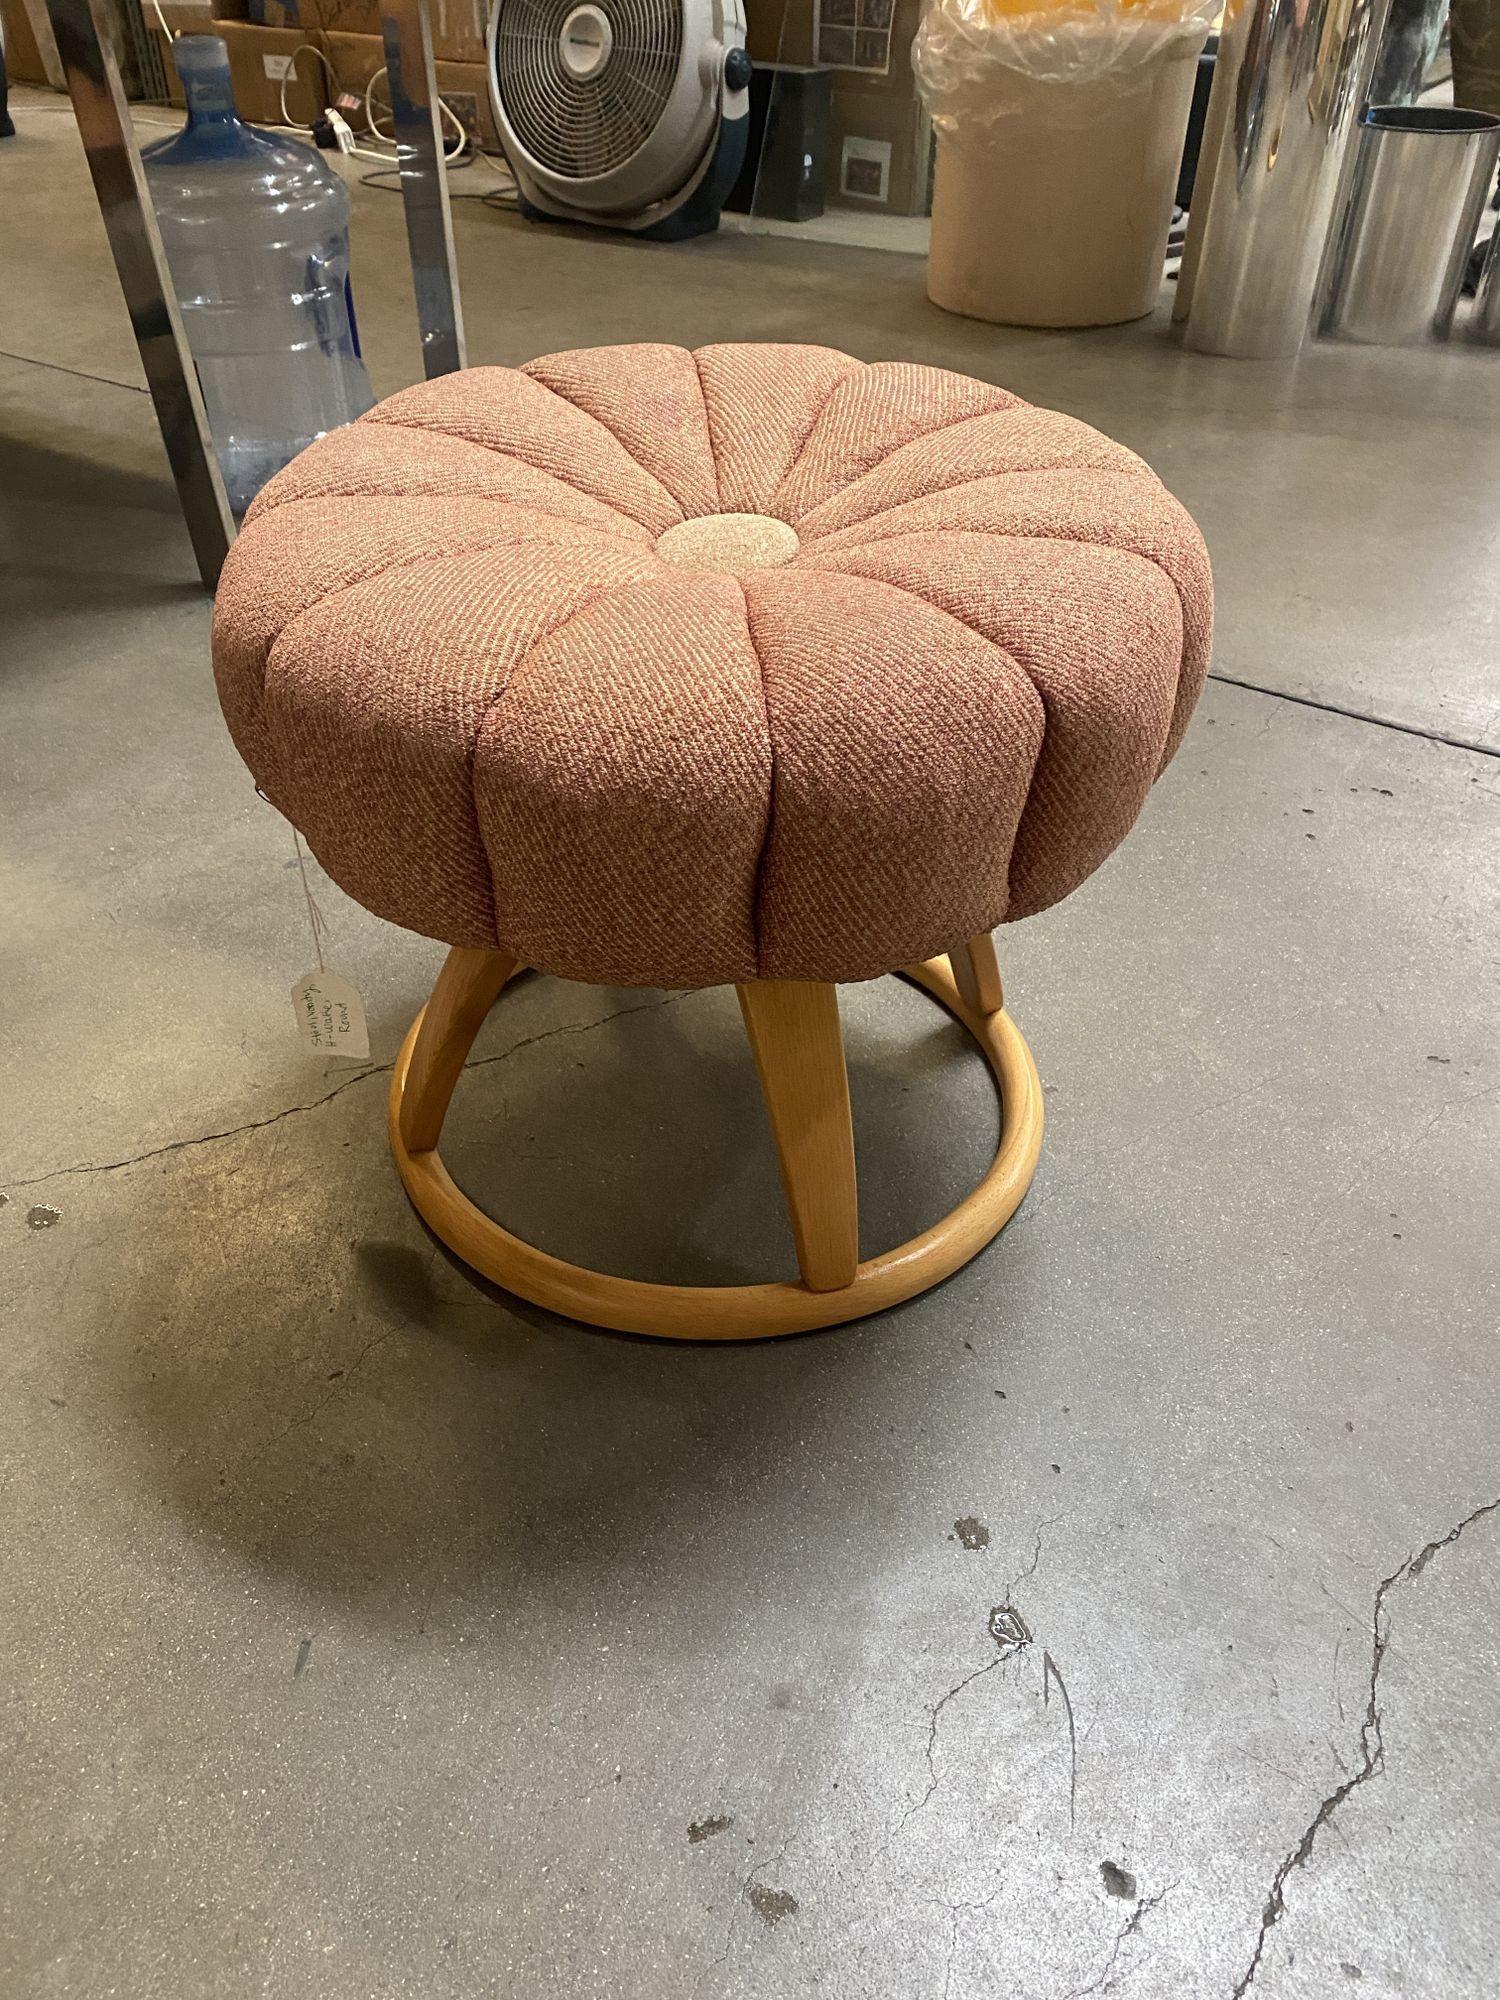 Classic Heywood Wakefield vanity stool/ poof hard to come by item! Vintage fabric is usable but easily reupholstered.
 
Wood shows wear, but all original.